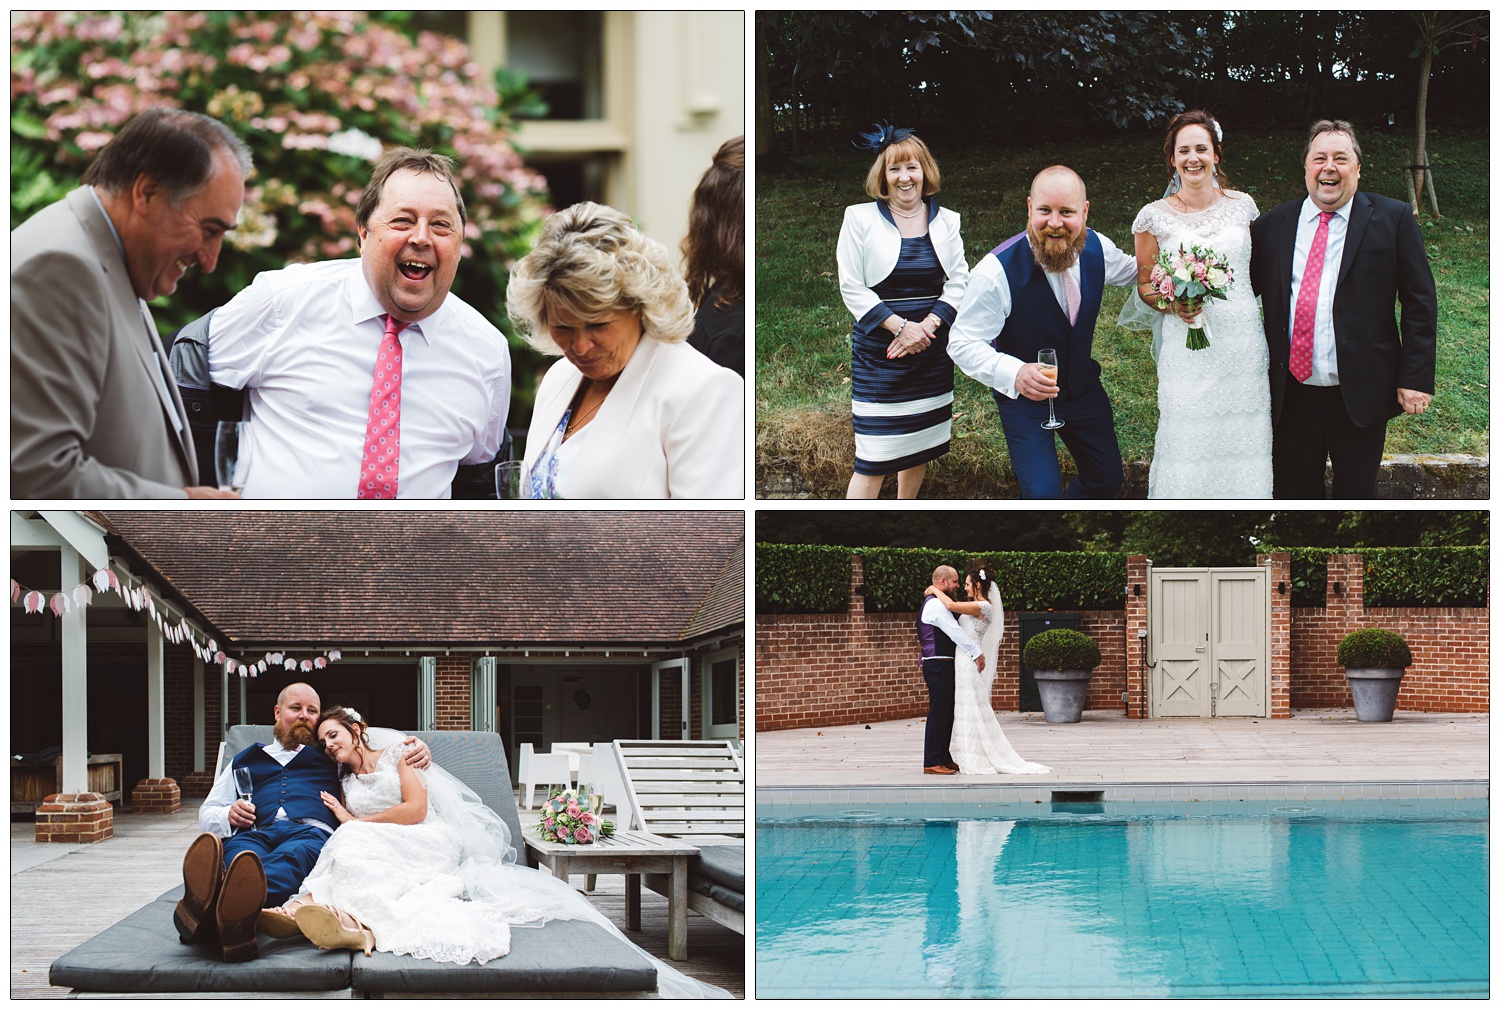 Bride and groom by the swimming pool at Essex wedding venue.